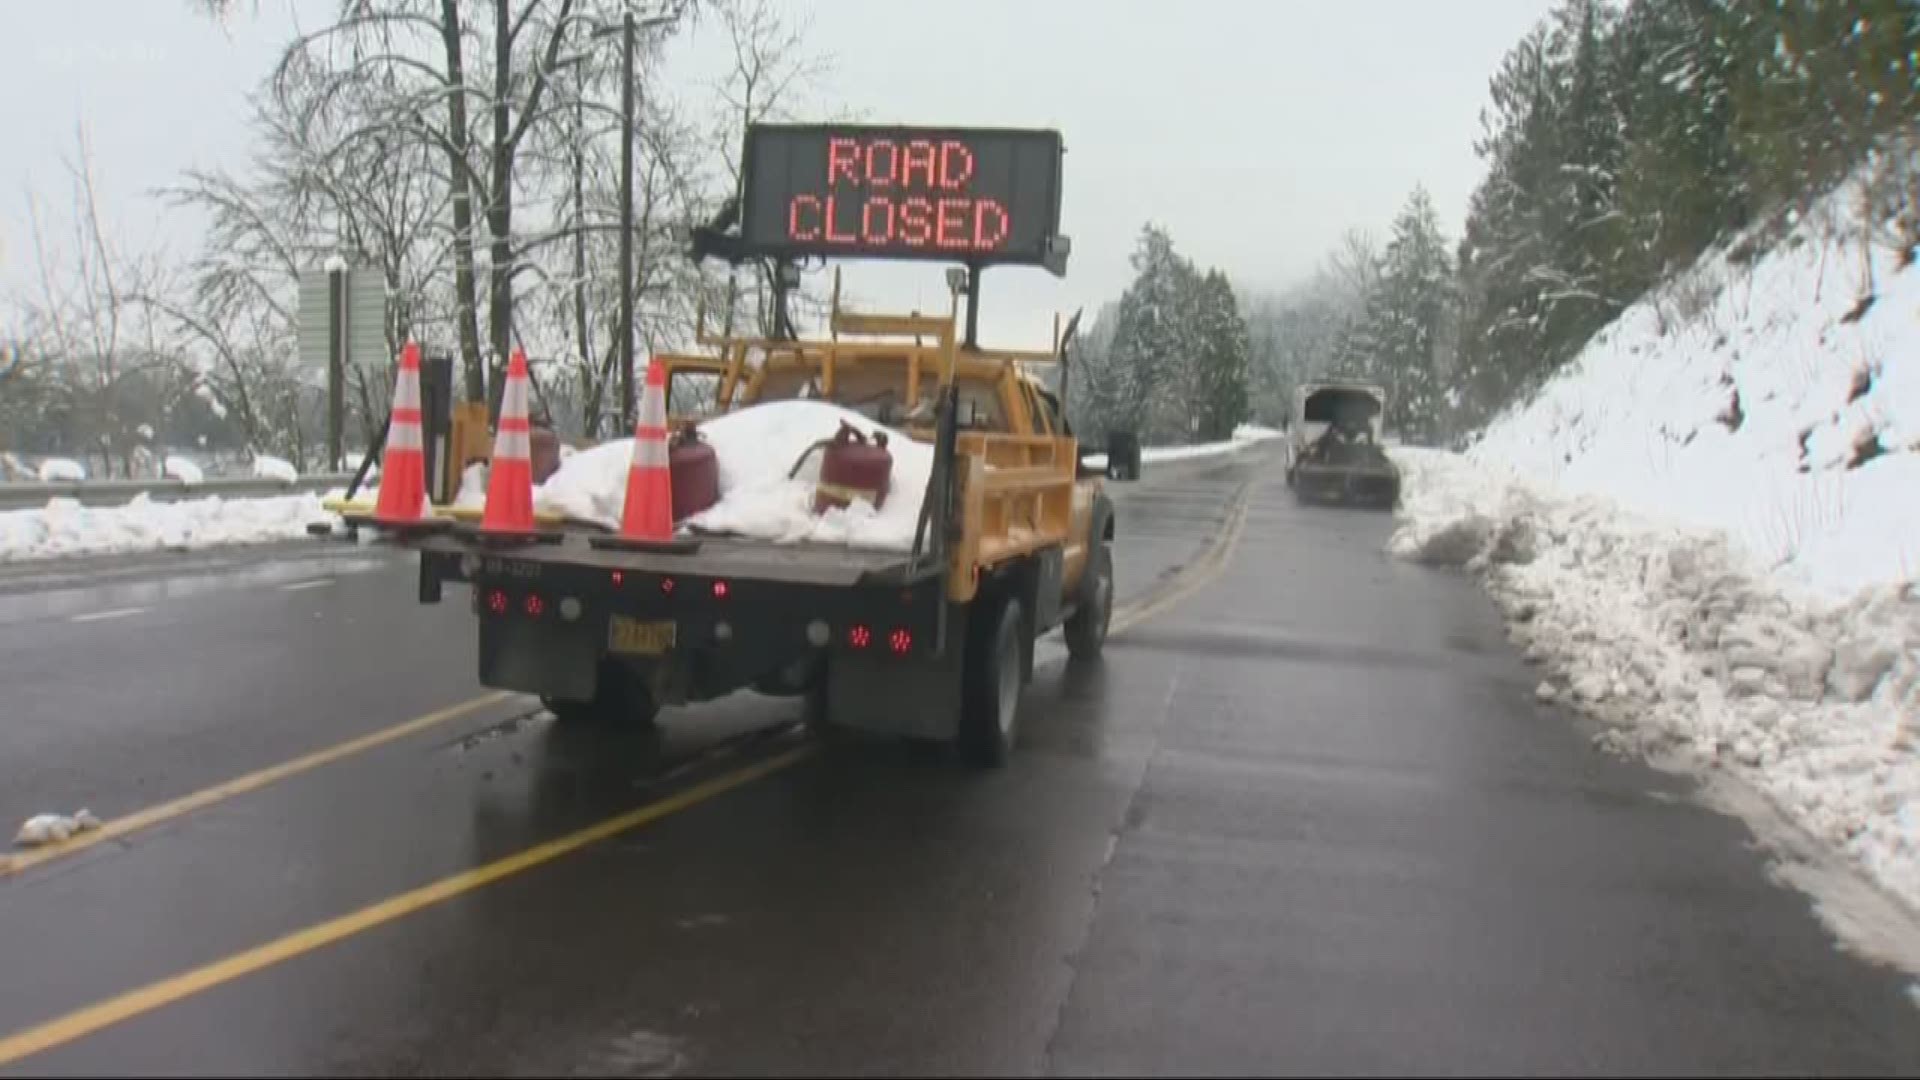 ODOT opened an emergency route on the closed Highway 58 to help utility crews start restoring power to Oakridge.